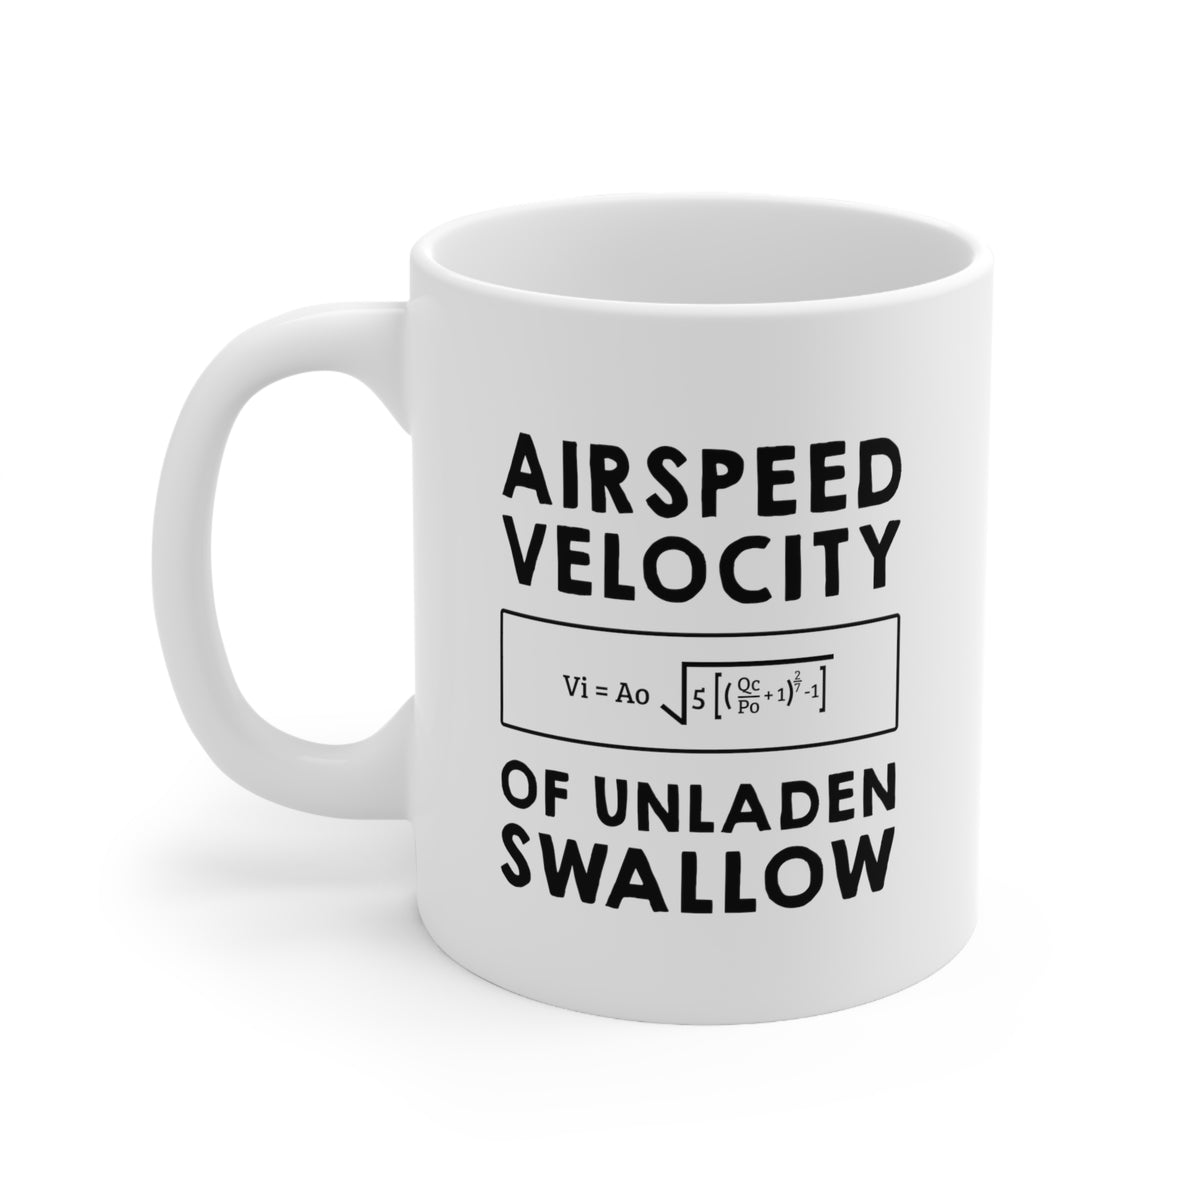 Math Nerd Formula Gifts - Funny Coffee Mug - Formula For The Airspeed Velocity of Unladen Swallow - Gifts For Men Women Friends, Students, Teachers, Coworkers